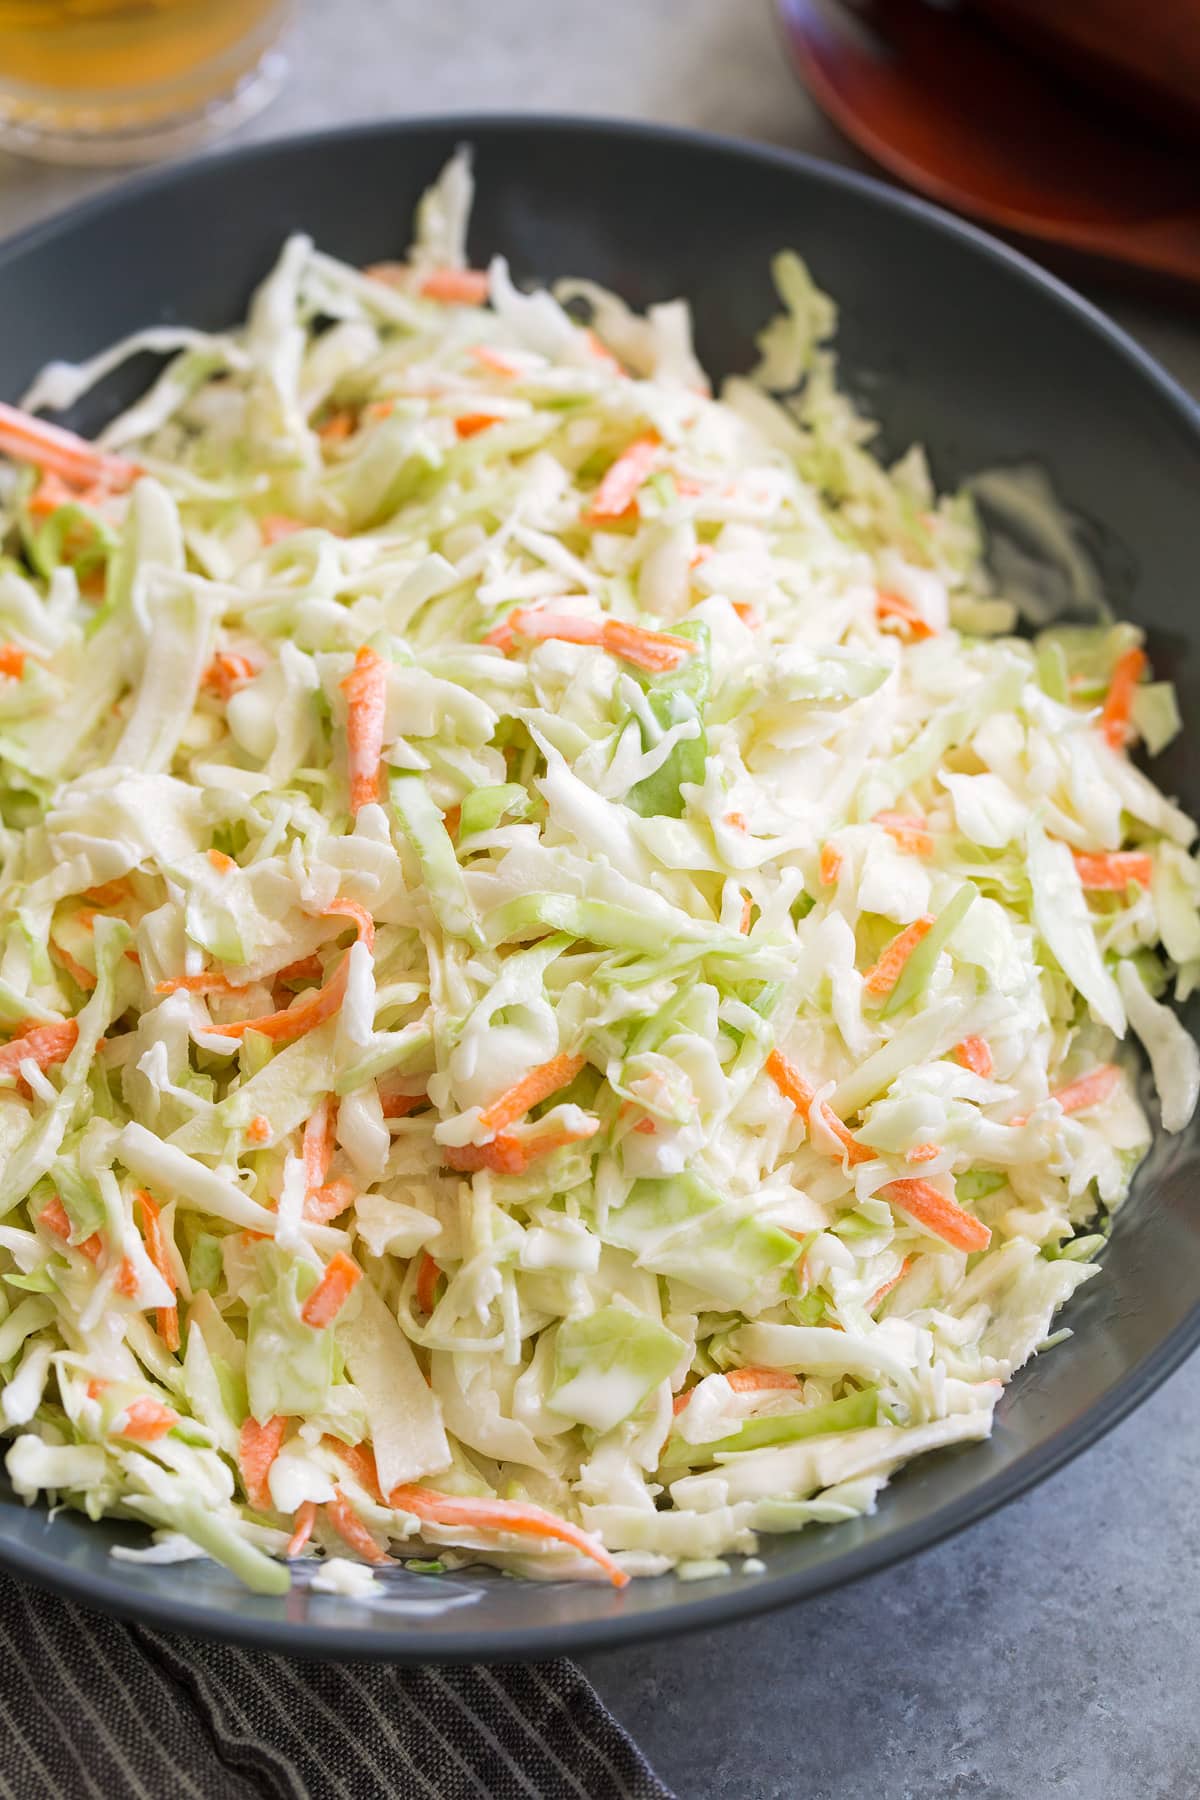 Coleslaw in a blue serving bowl set over a grey surface.